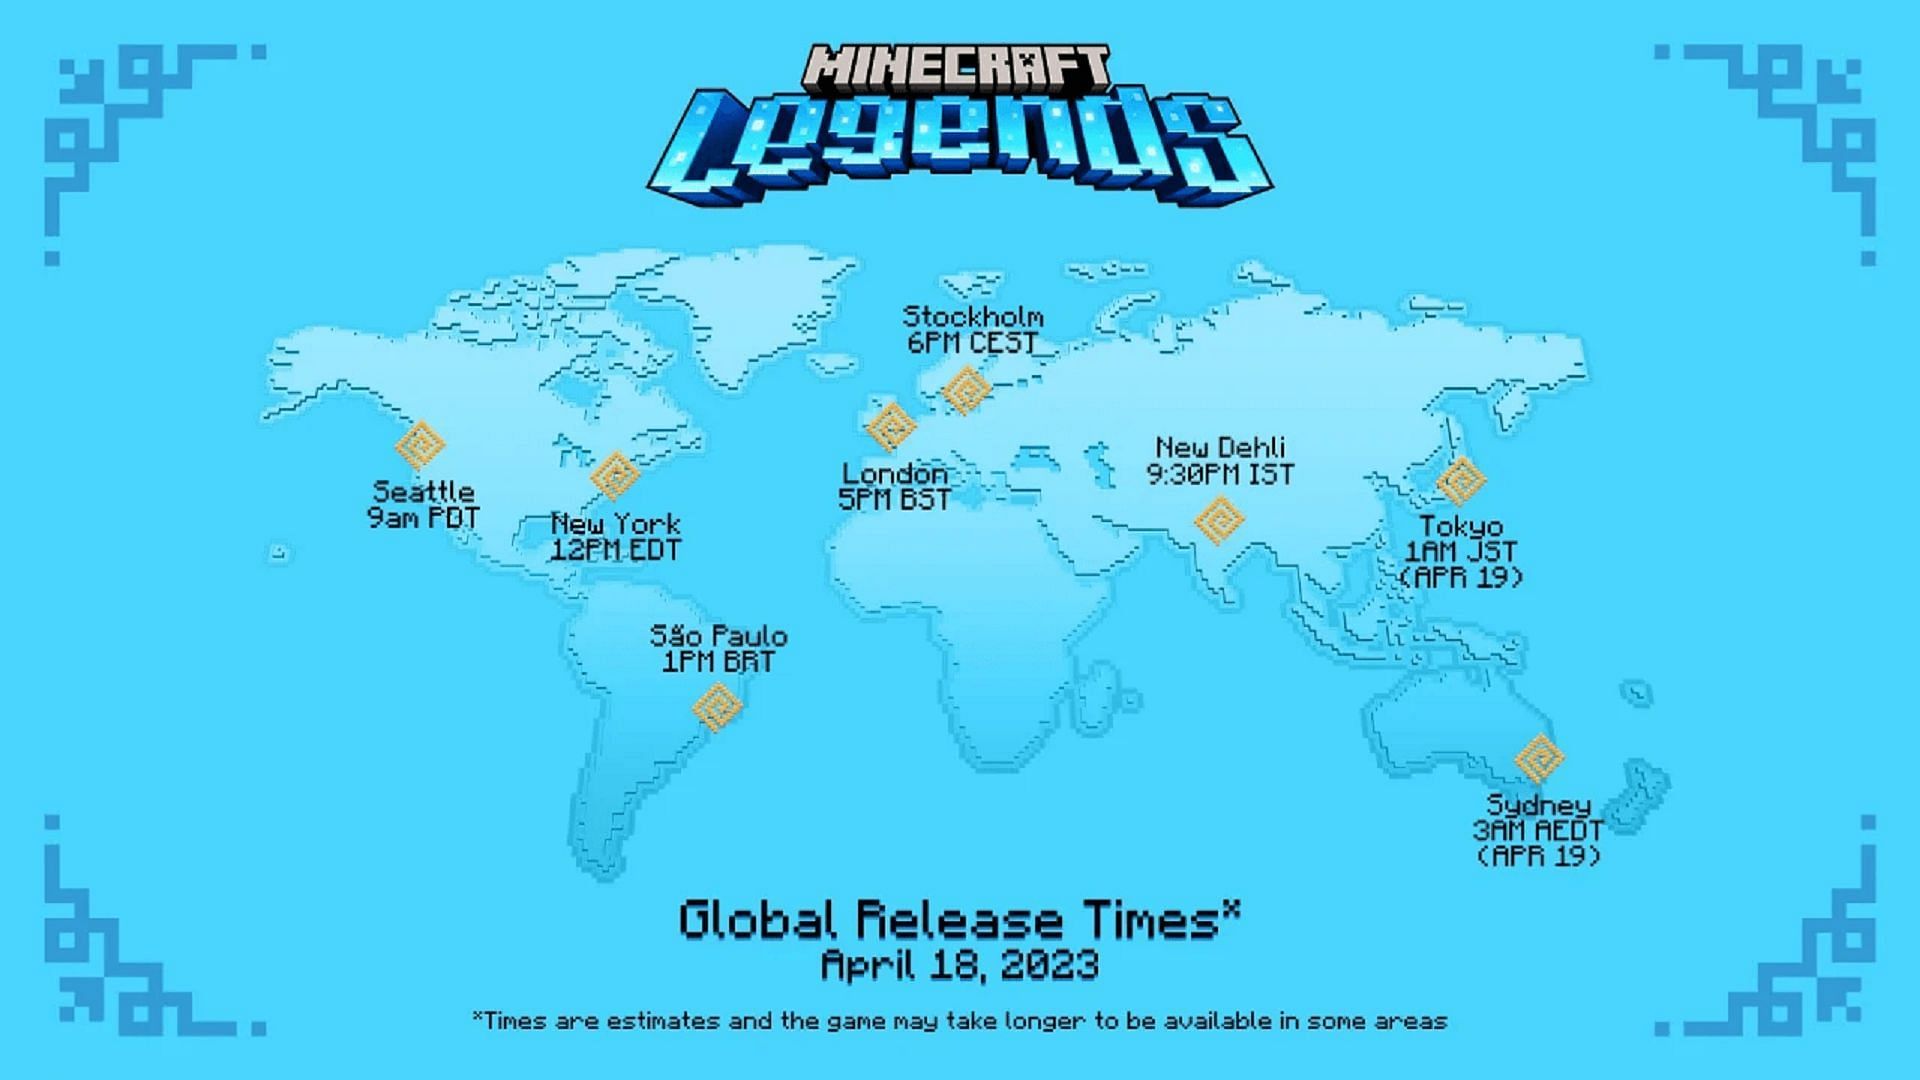 Minecraft Legends will release at the same time, albeit in different time zones (Image via Mojang)